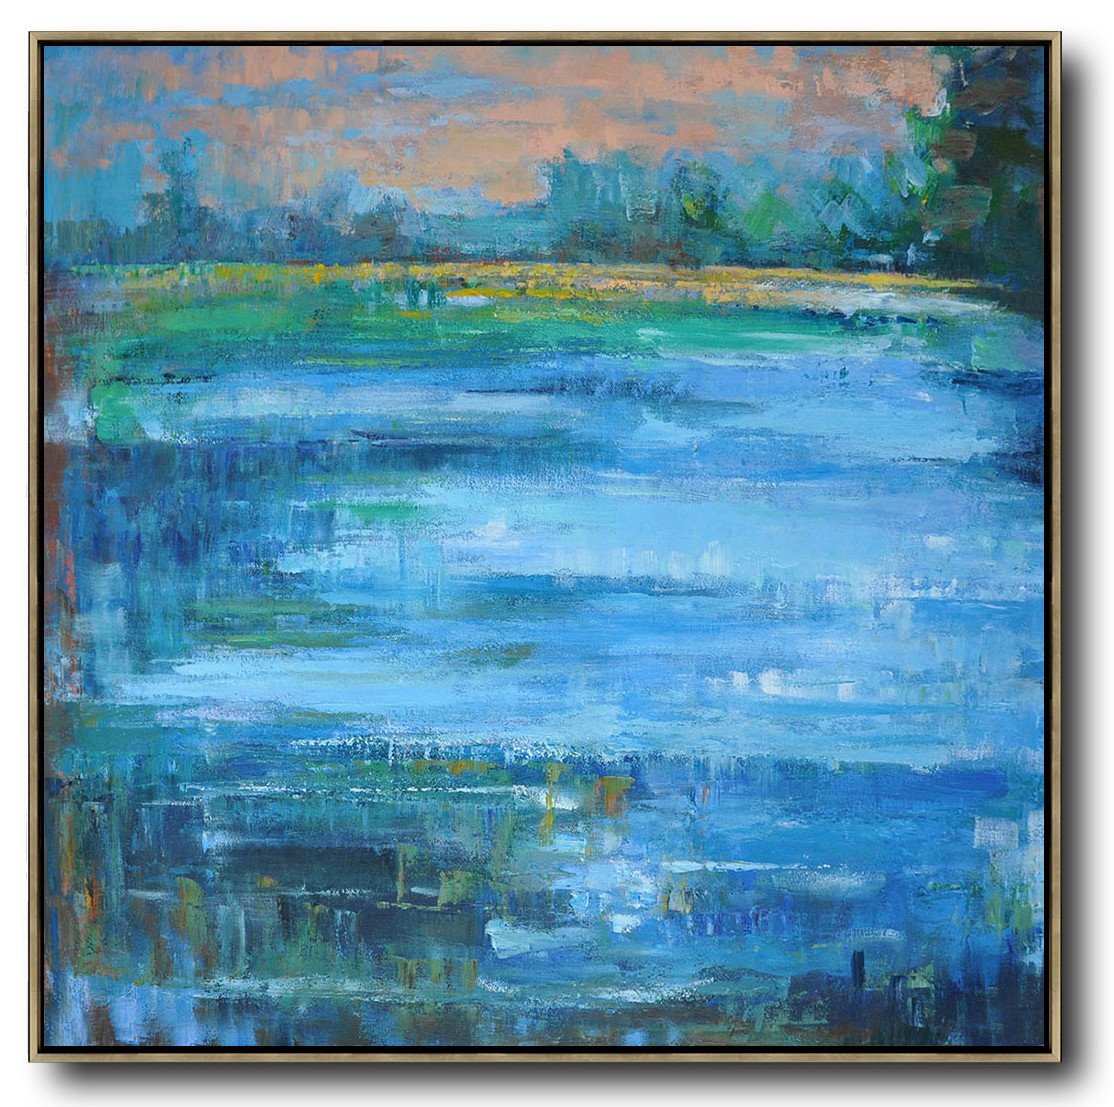 Hand-painted oversized Abstract Landscape Oil Painting by Jackson abstract art examples